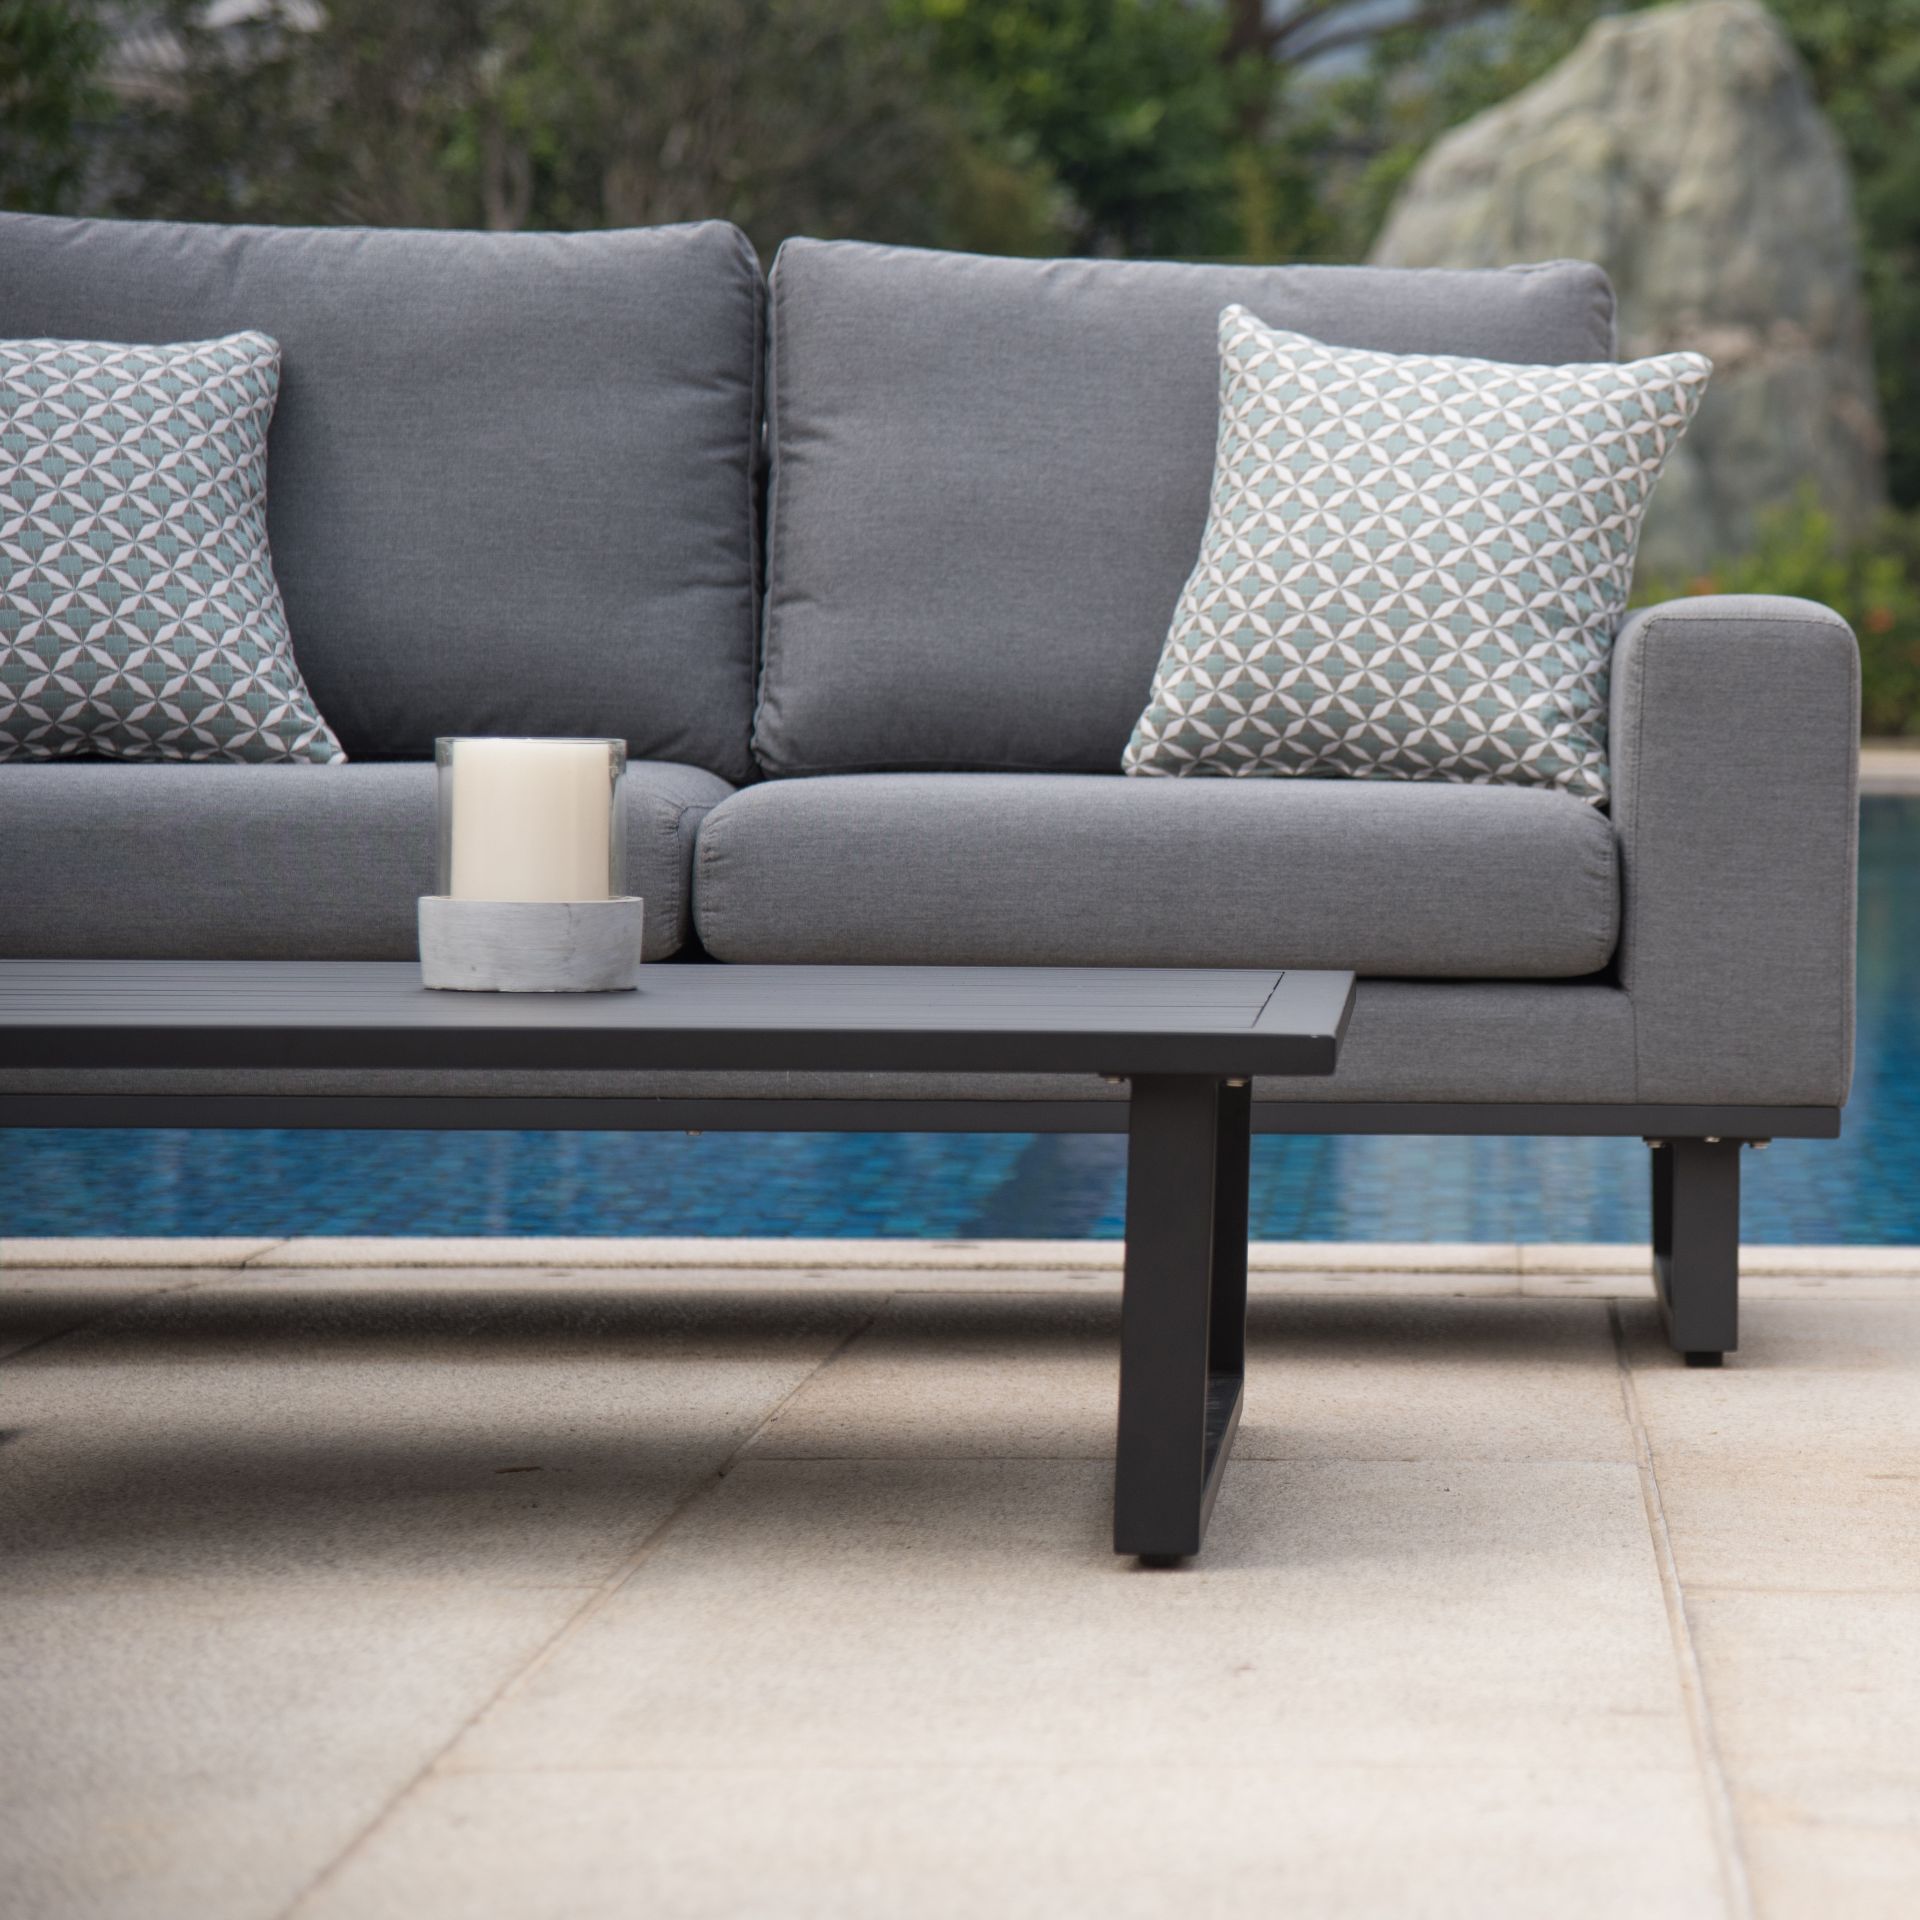 Ethos Outdoor 2 Seat Sofa Set With Coffee Table (Flanelle) *BRAND NEW* - Image 4 of 7